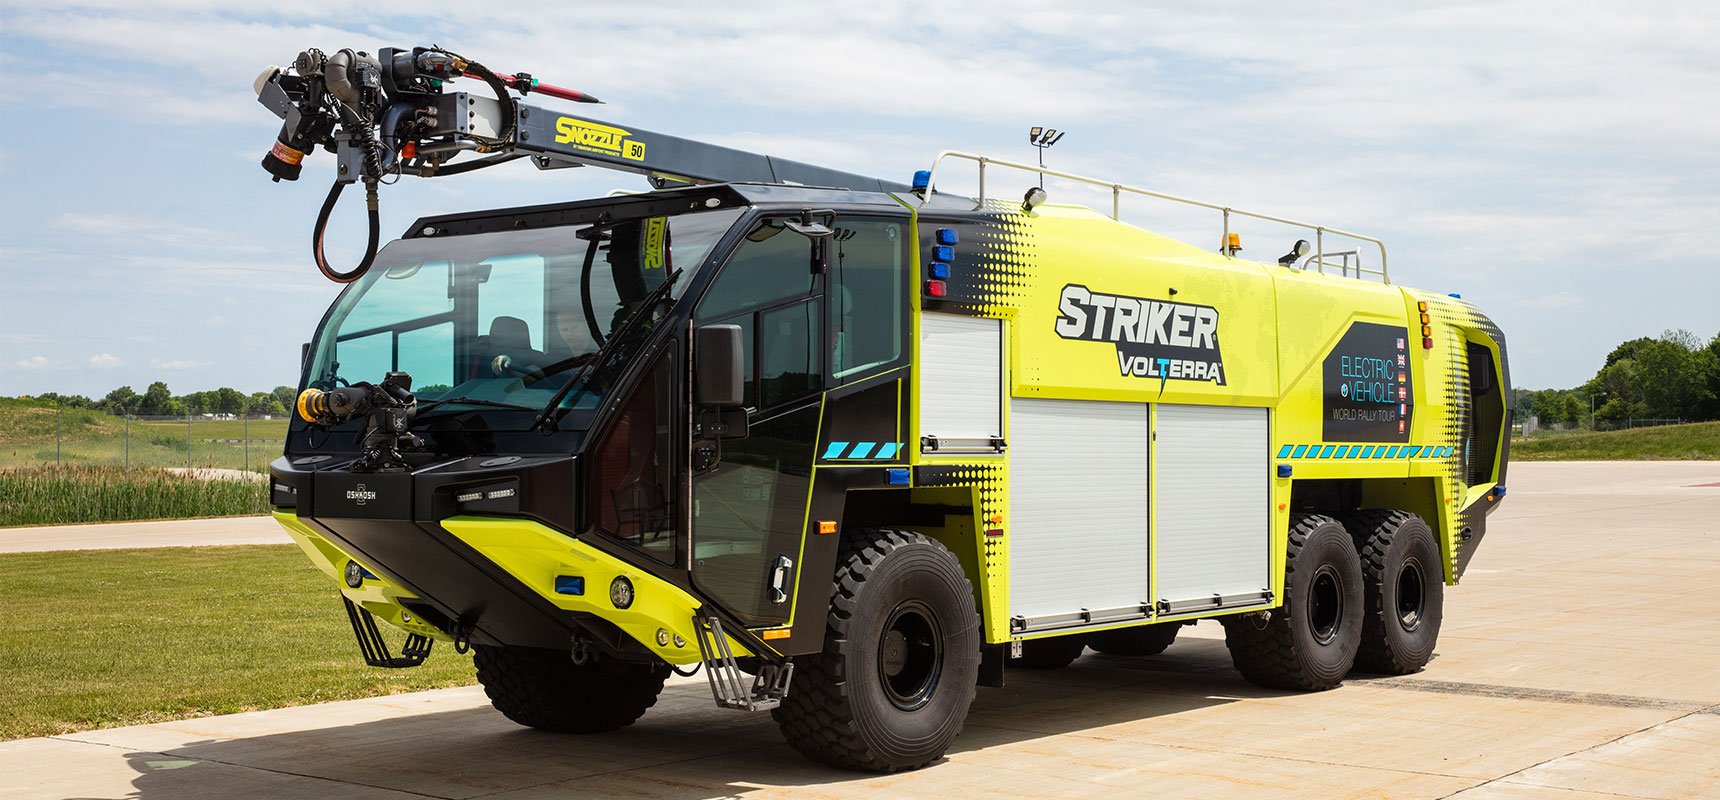 King County International Airport in Washington has ordered an Oshkosh Airport Products Striker Volterra